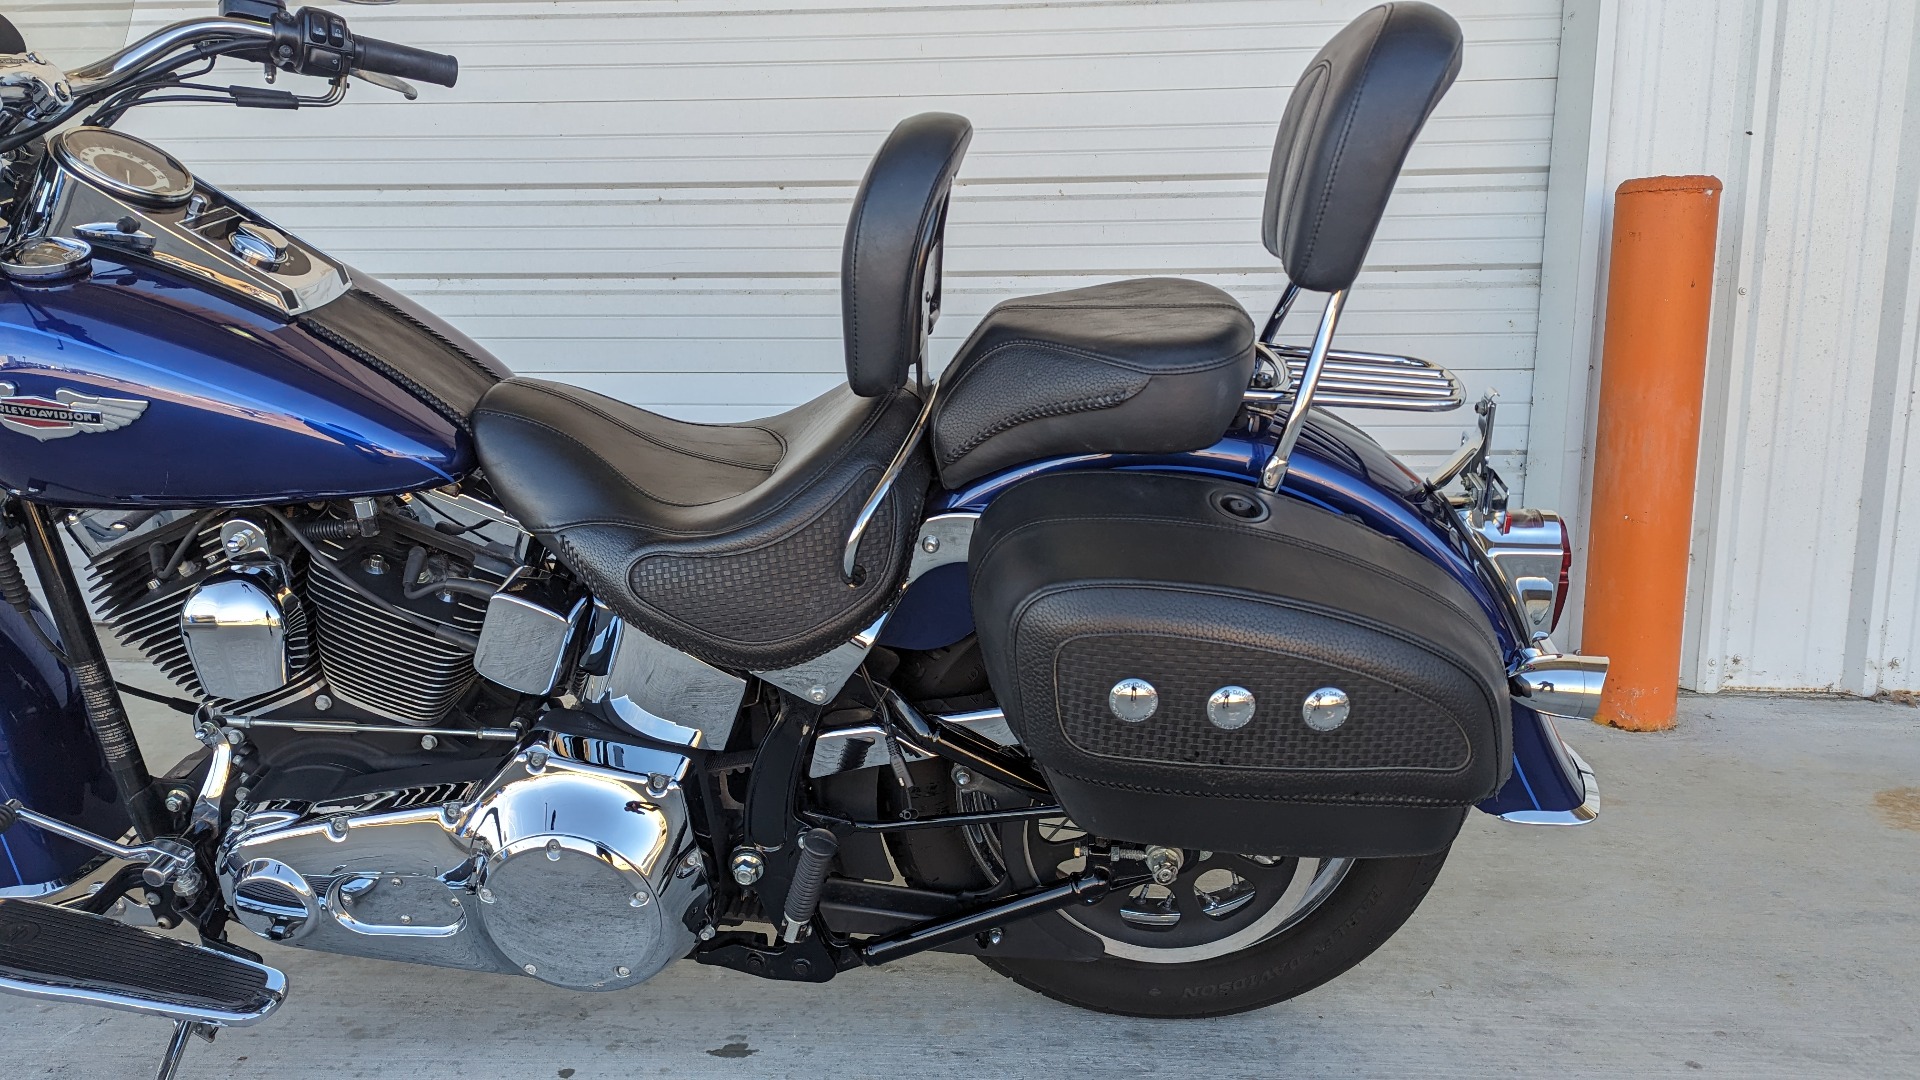 2006 harley davidson deluxe for sale in texas - Photo 8